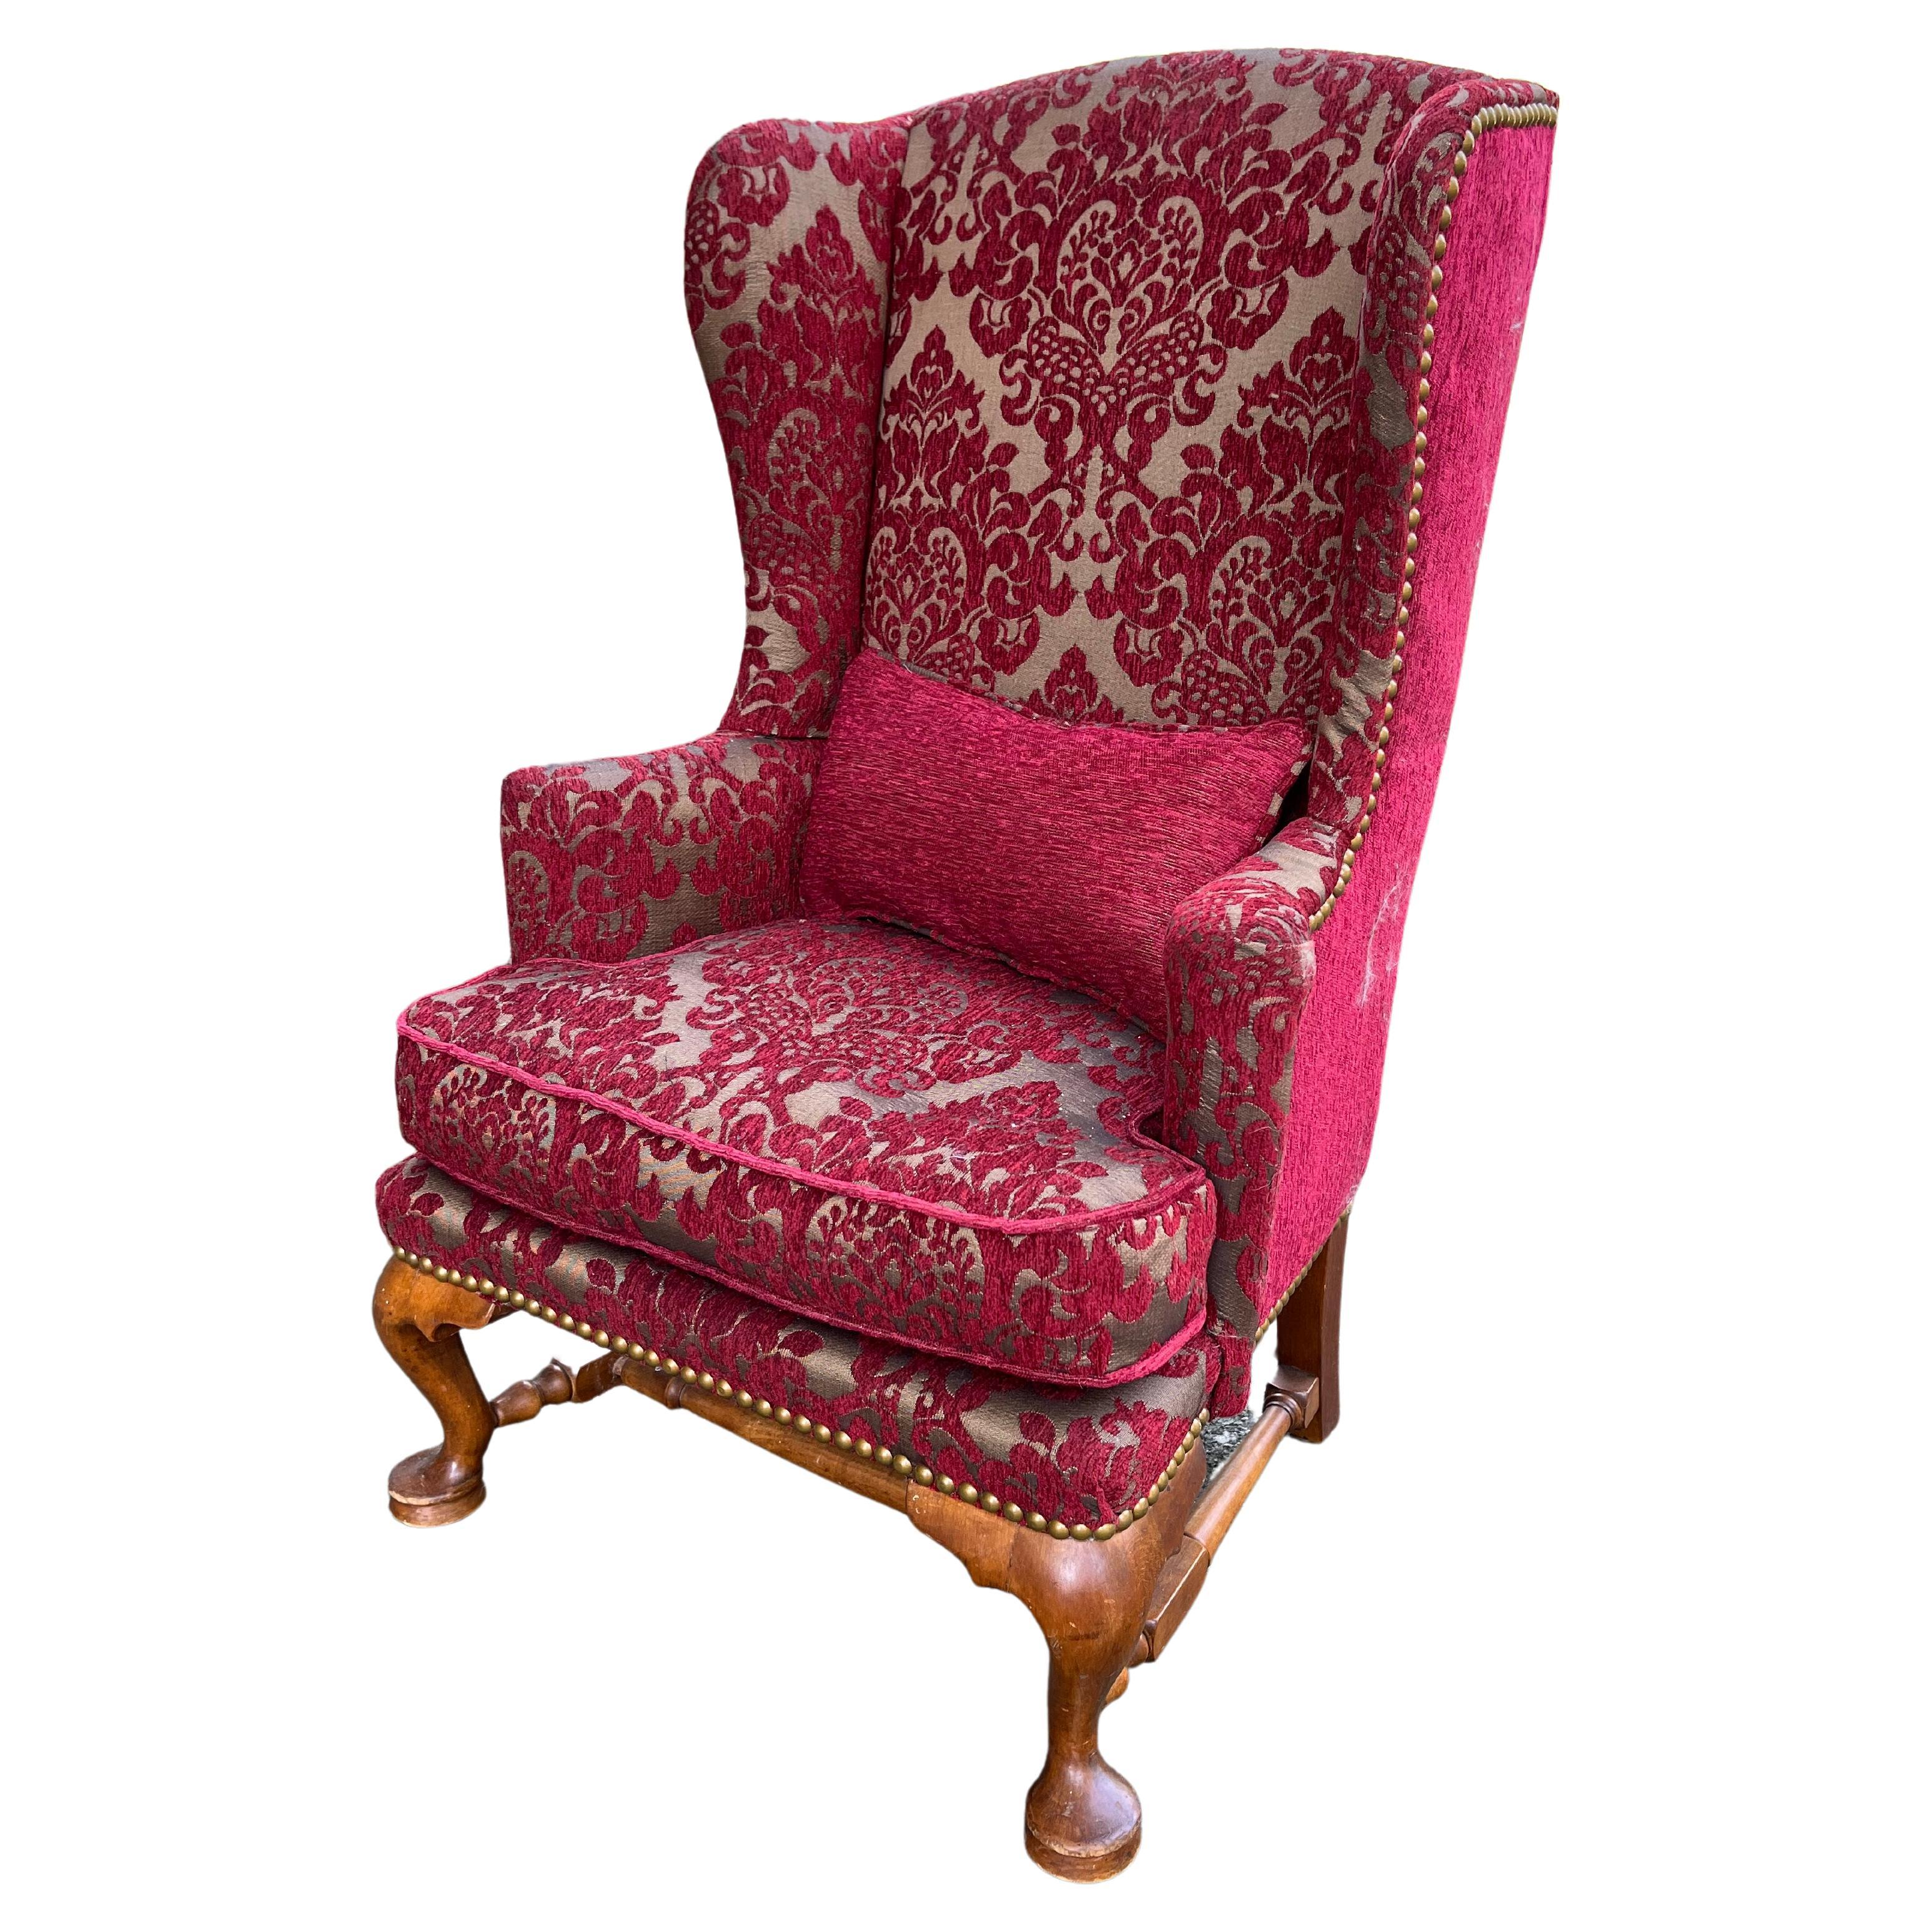 Child’s Size Queen Anne Wing Chair, C. 1900